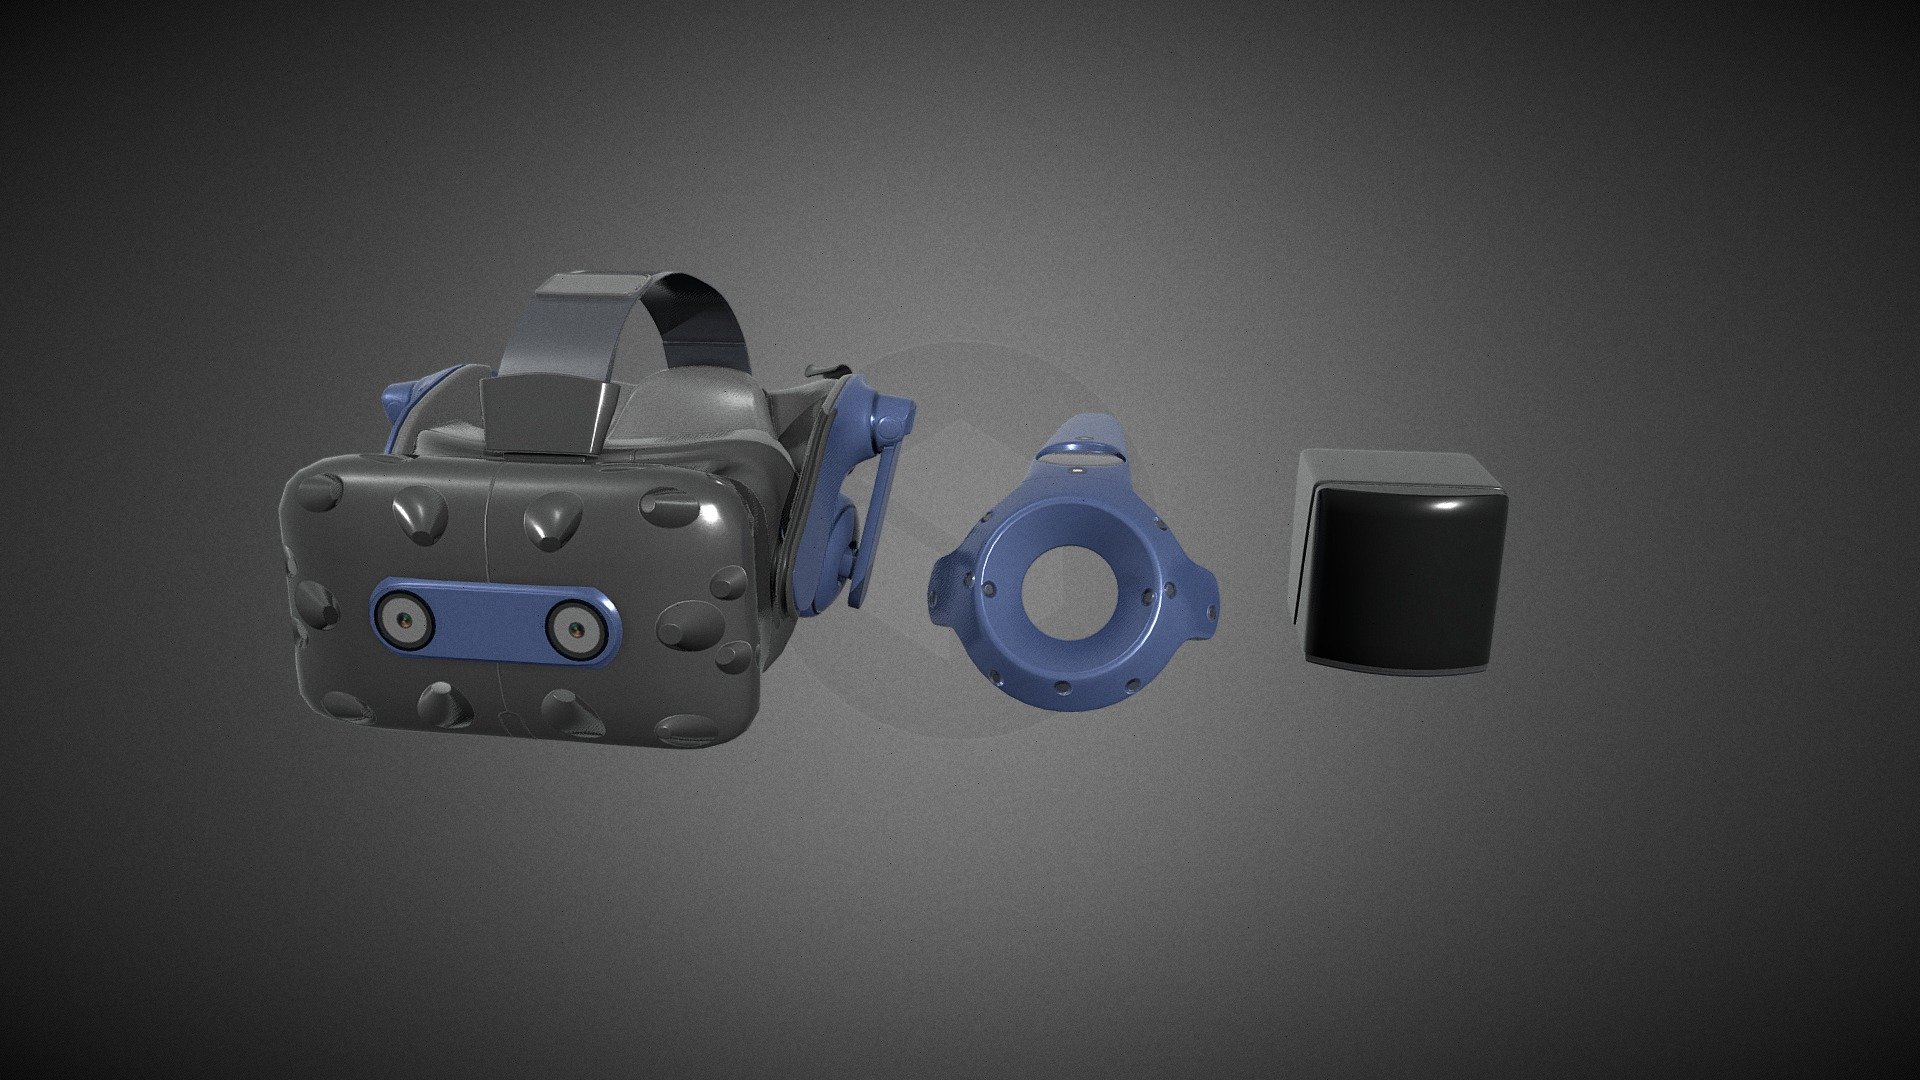 HTC Vive Pro 2 contains low poly 3D models of VR Device with High Quality textures to fill up your game environment. The assets are VR-Ready and game ready.

Total Polygons - 26116

Total Tris - 51736

These models are delivered without any brandings or logos attached. The End users/Buyers are solely responsible for ensuring compliance with any branding or trademark requirements applicable to their specific projects.

For Unity3d (Built-in, URP, HDRP) Ready Assets visit our Unity Asset Store Page

Enjoy and please rate the asset!

Contact us on for AR/VR related queries and development support

Gmail - designer@devdensolutions.com

Website

Instagram

Facebook

Linkedin

Youtube

Buy Pizza - HTC Vive Pro 2 - Buy Royalty Free 3D model by Devden 3d model